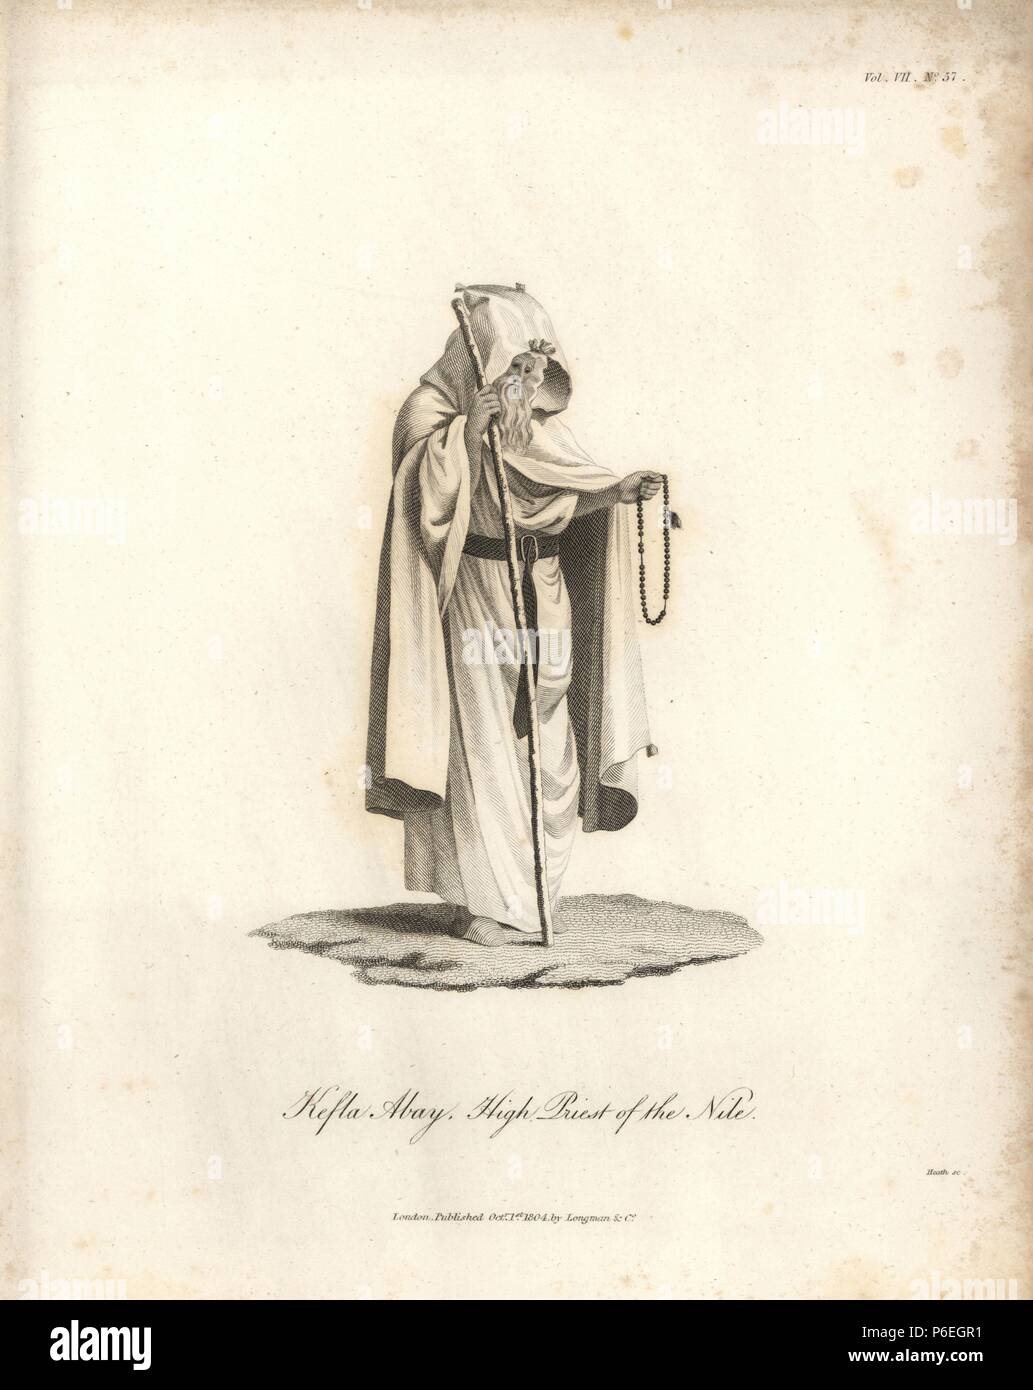 Kefla Abay, high priest of the Nile, in robes with staff and prayer beads. Copperplate engraving from James Bruce's 'Travels to Discover the Source of the Nile, in the years 1768, 1769, 1770, 1771, 1772 and 1773,' London, 1790. James Bruce (1730-1794) was a Scottish explorer and travel writer who spent more than 12 years in North Africa and Ethiopia. Engraved by Heath after an original drawing by Bruce. Stock Photo